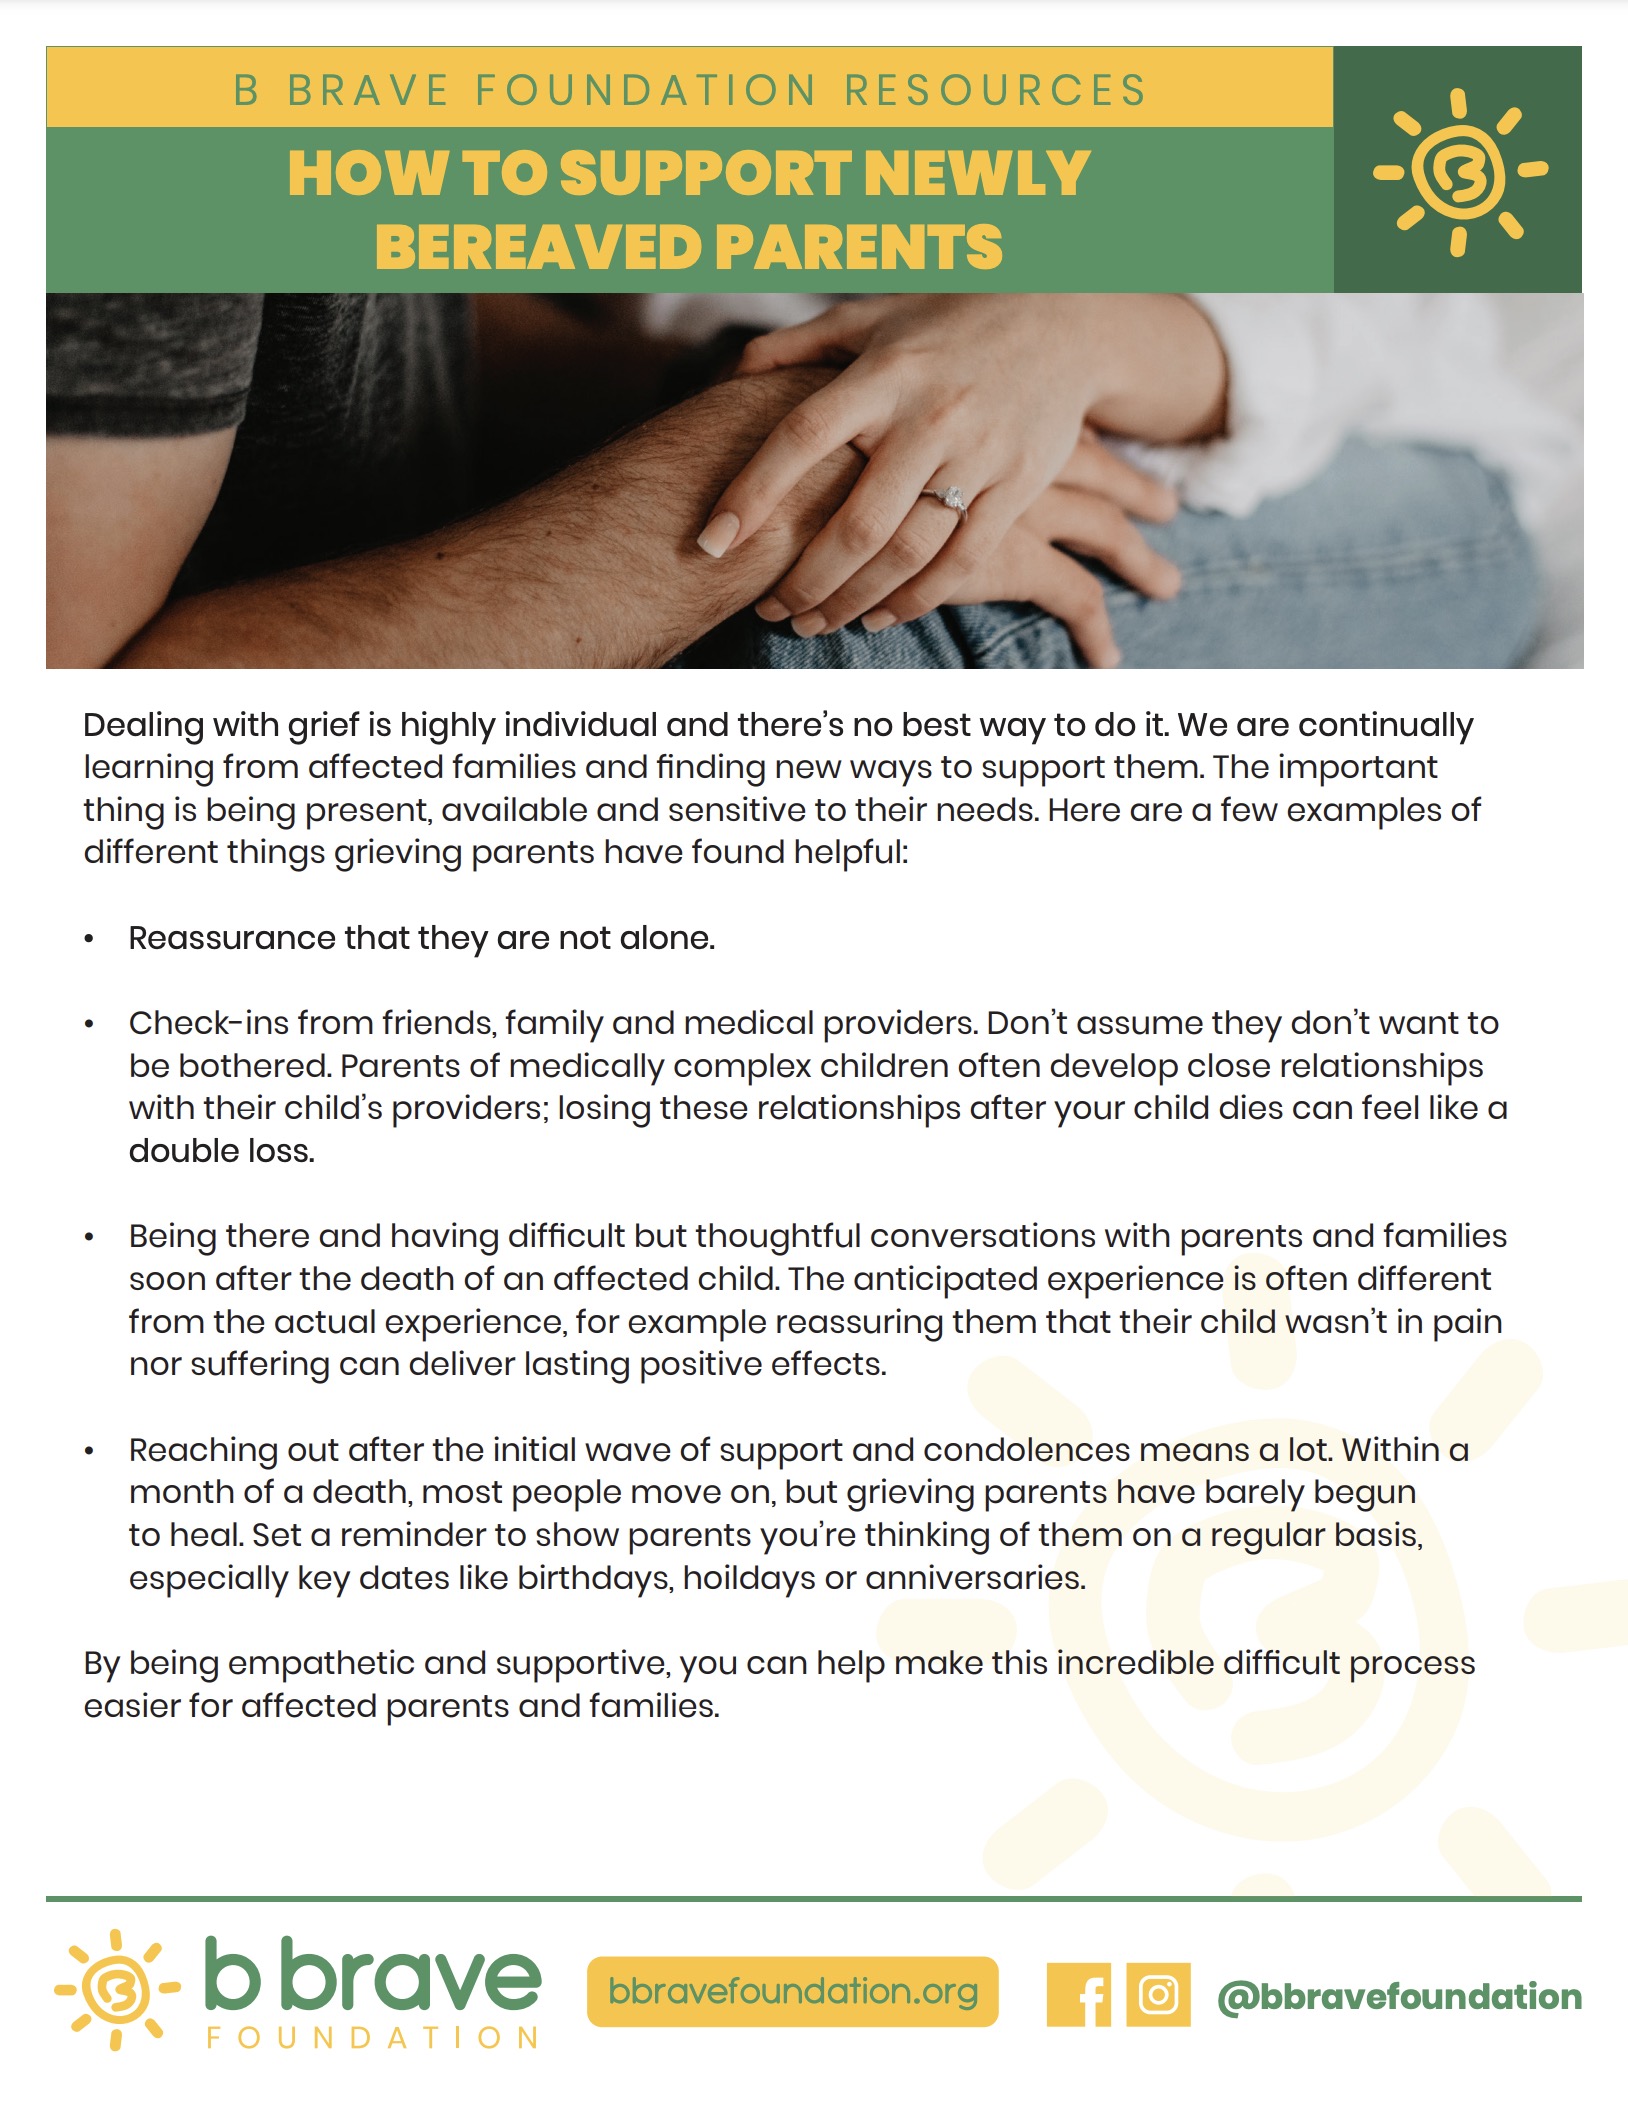 How to Support Newly Bereaved Parents